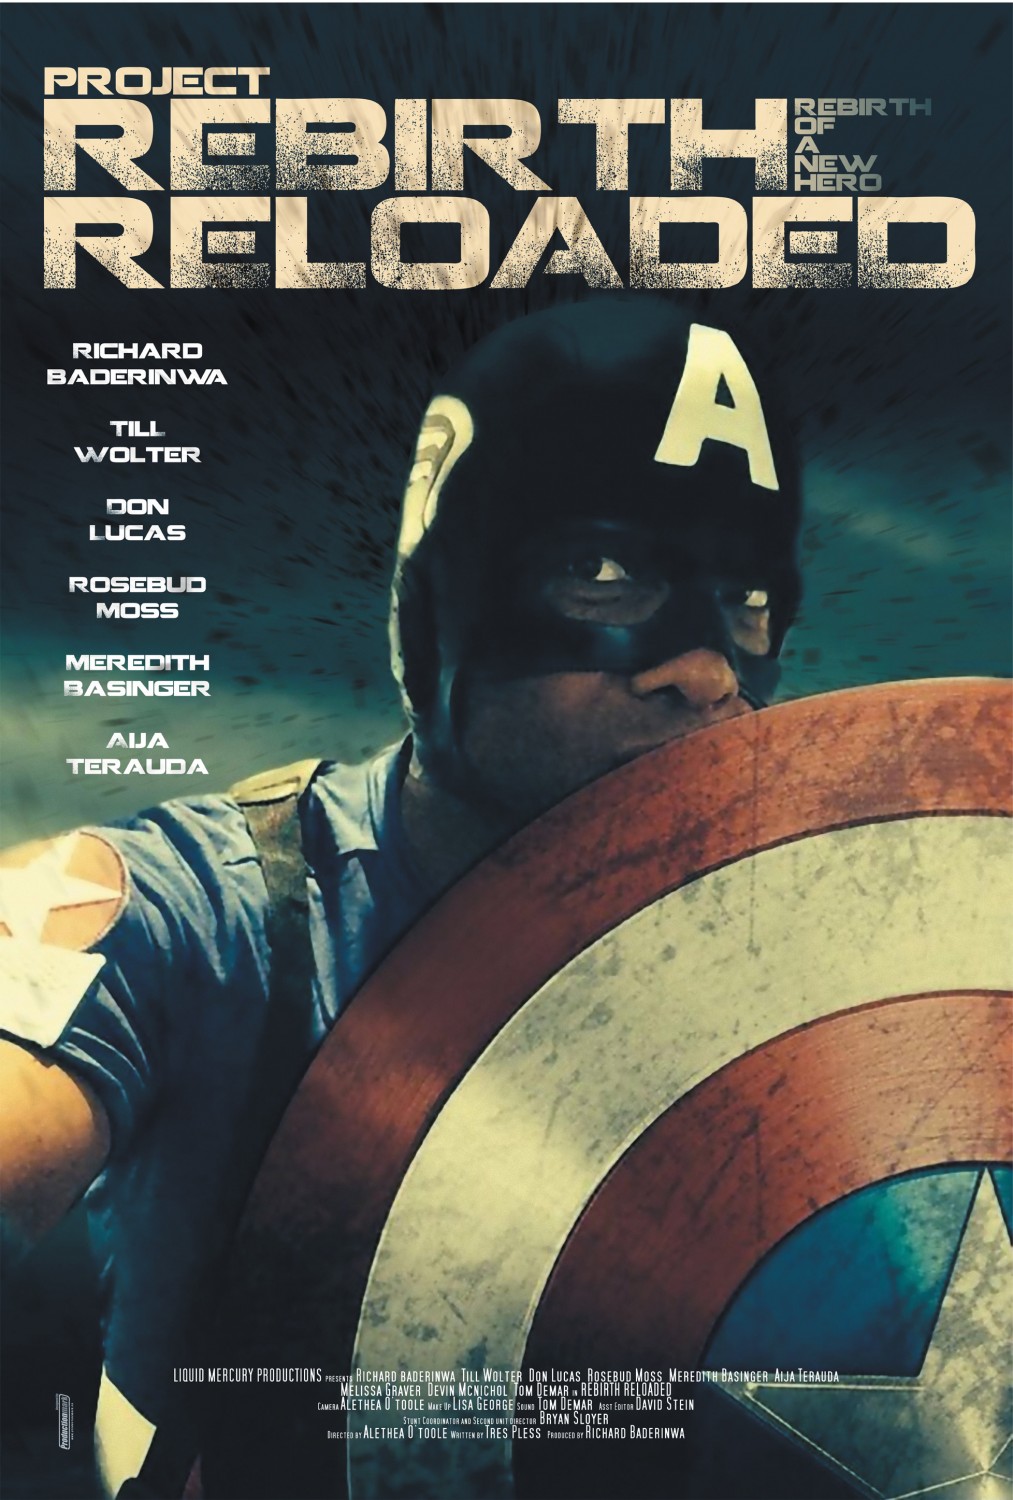 Extra Large Movie Poster Image for Rebirth Reloaded